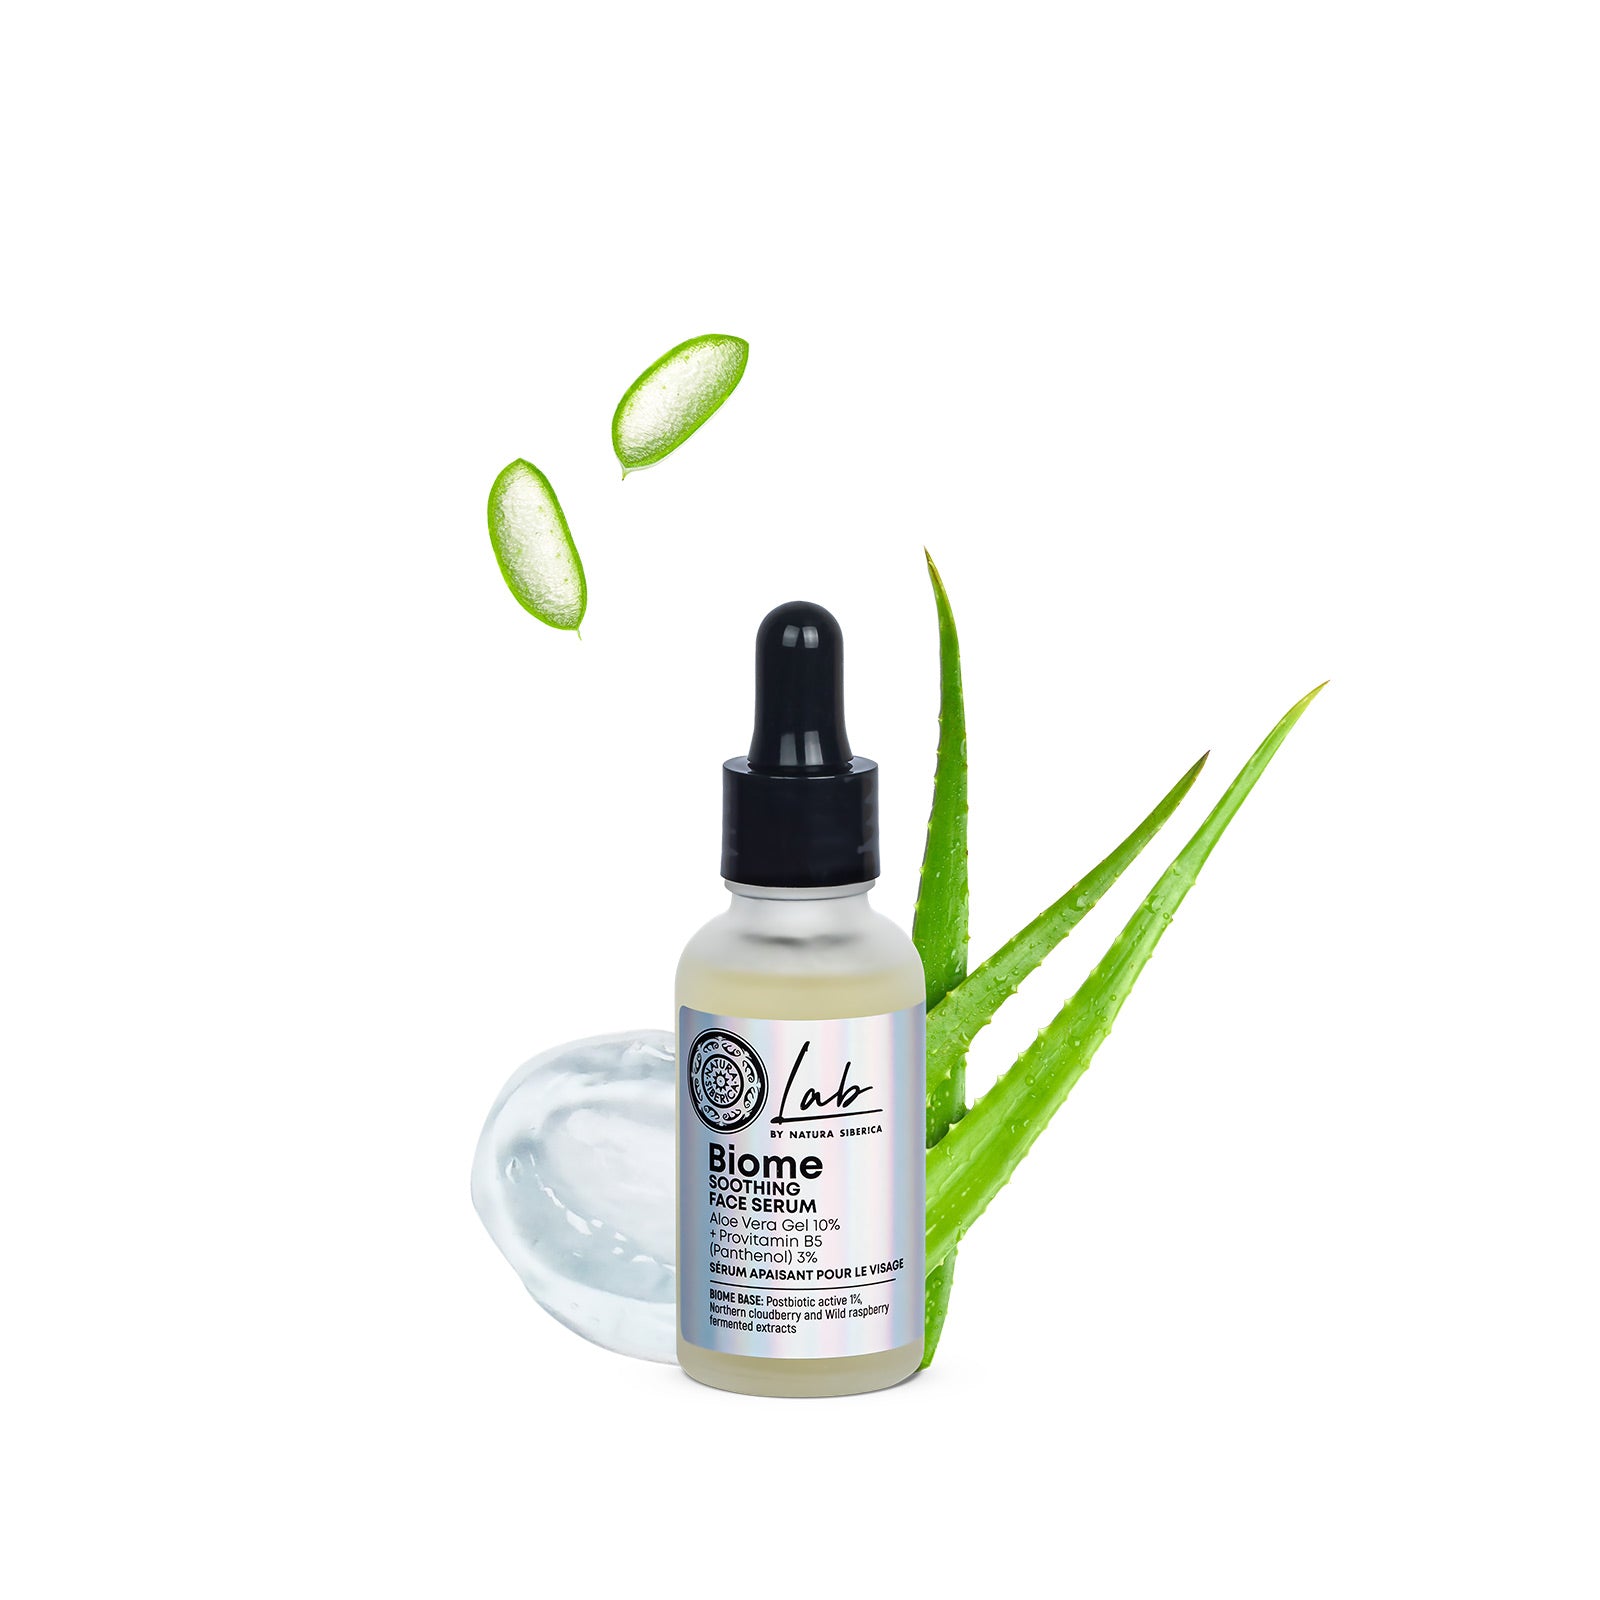 Lab by NS. Biome. Soothing Face Serum 30 ml